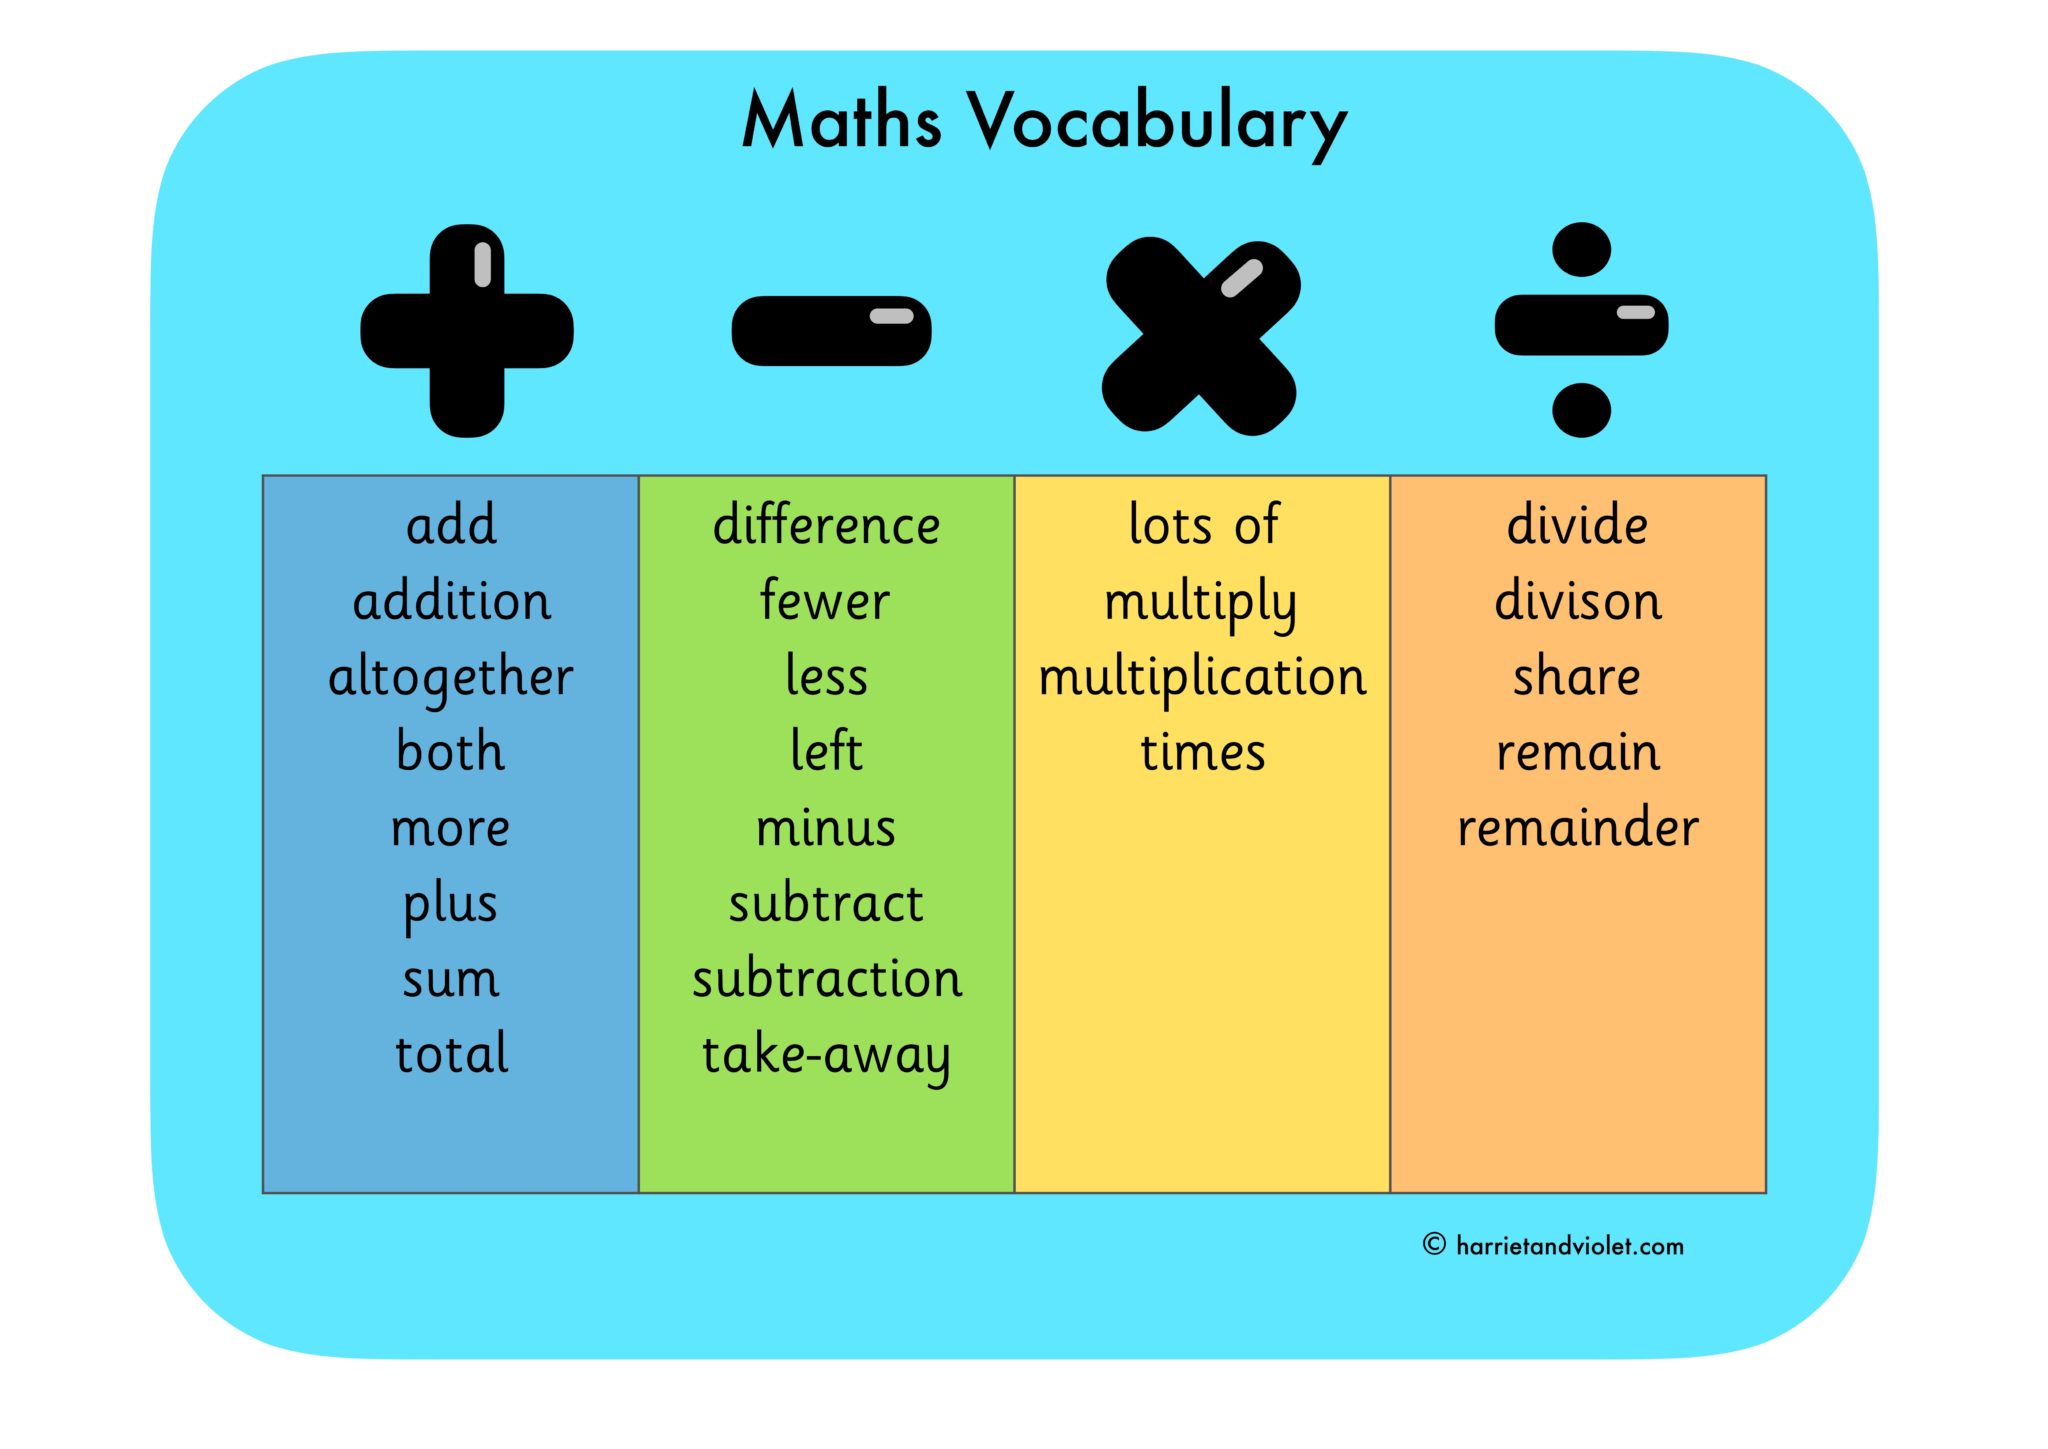 Boards topic. Математика Vocabulary. Mathematical terms in English. Maths in English. Math English Vocabulary.